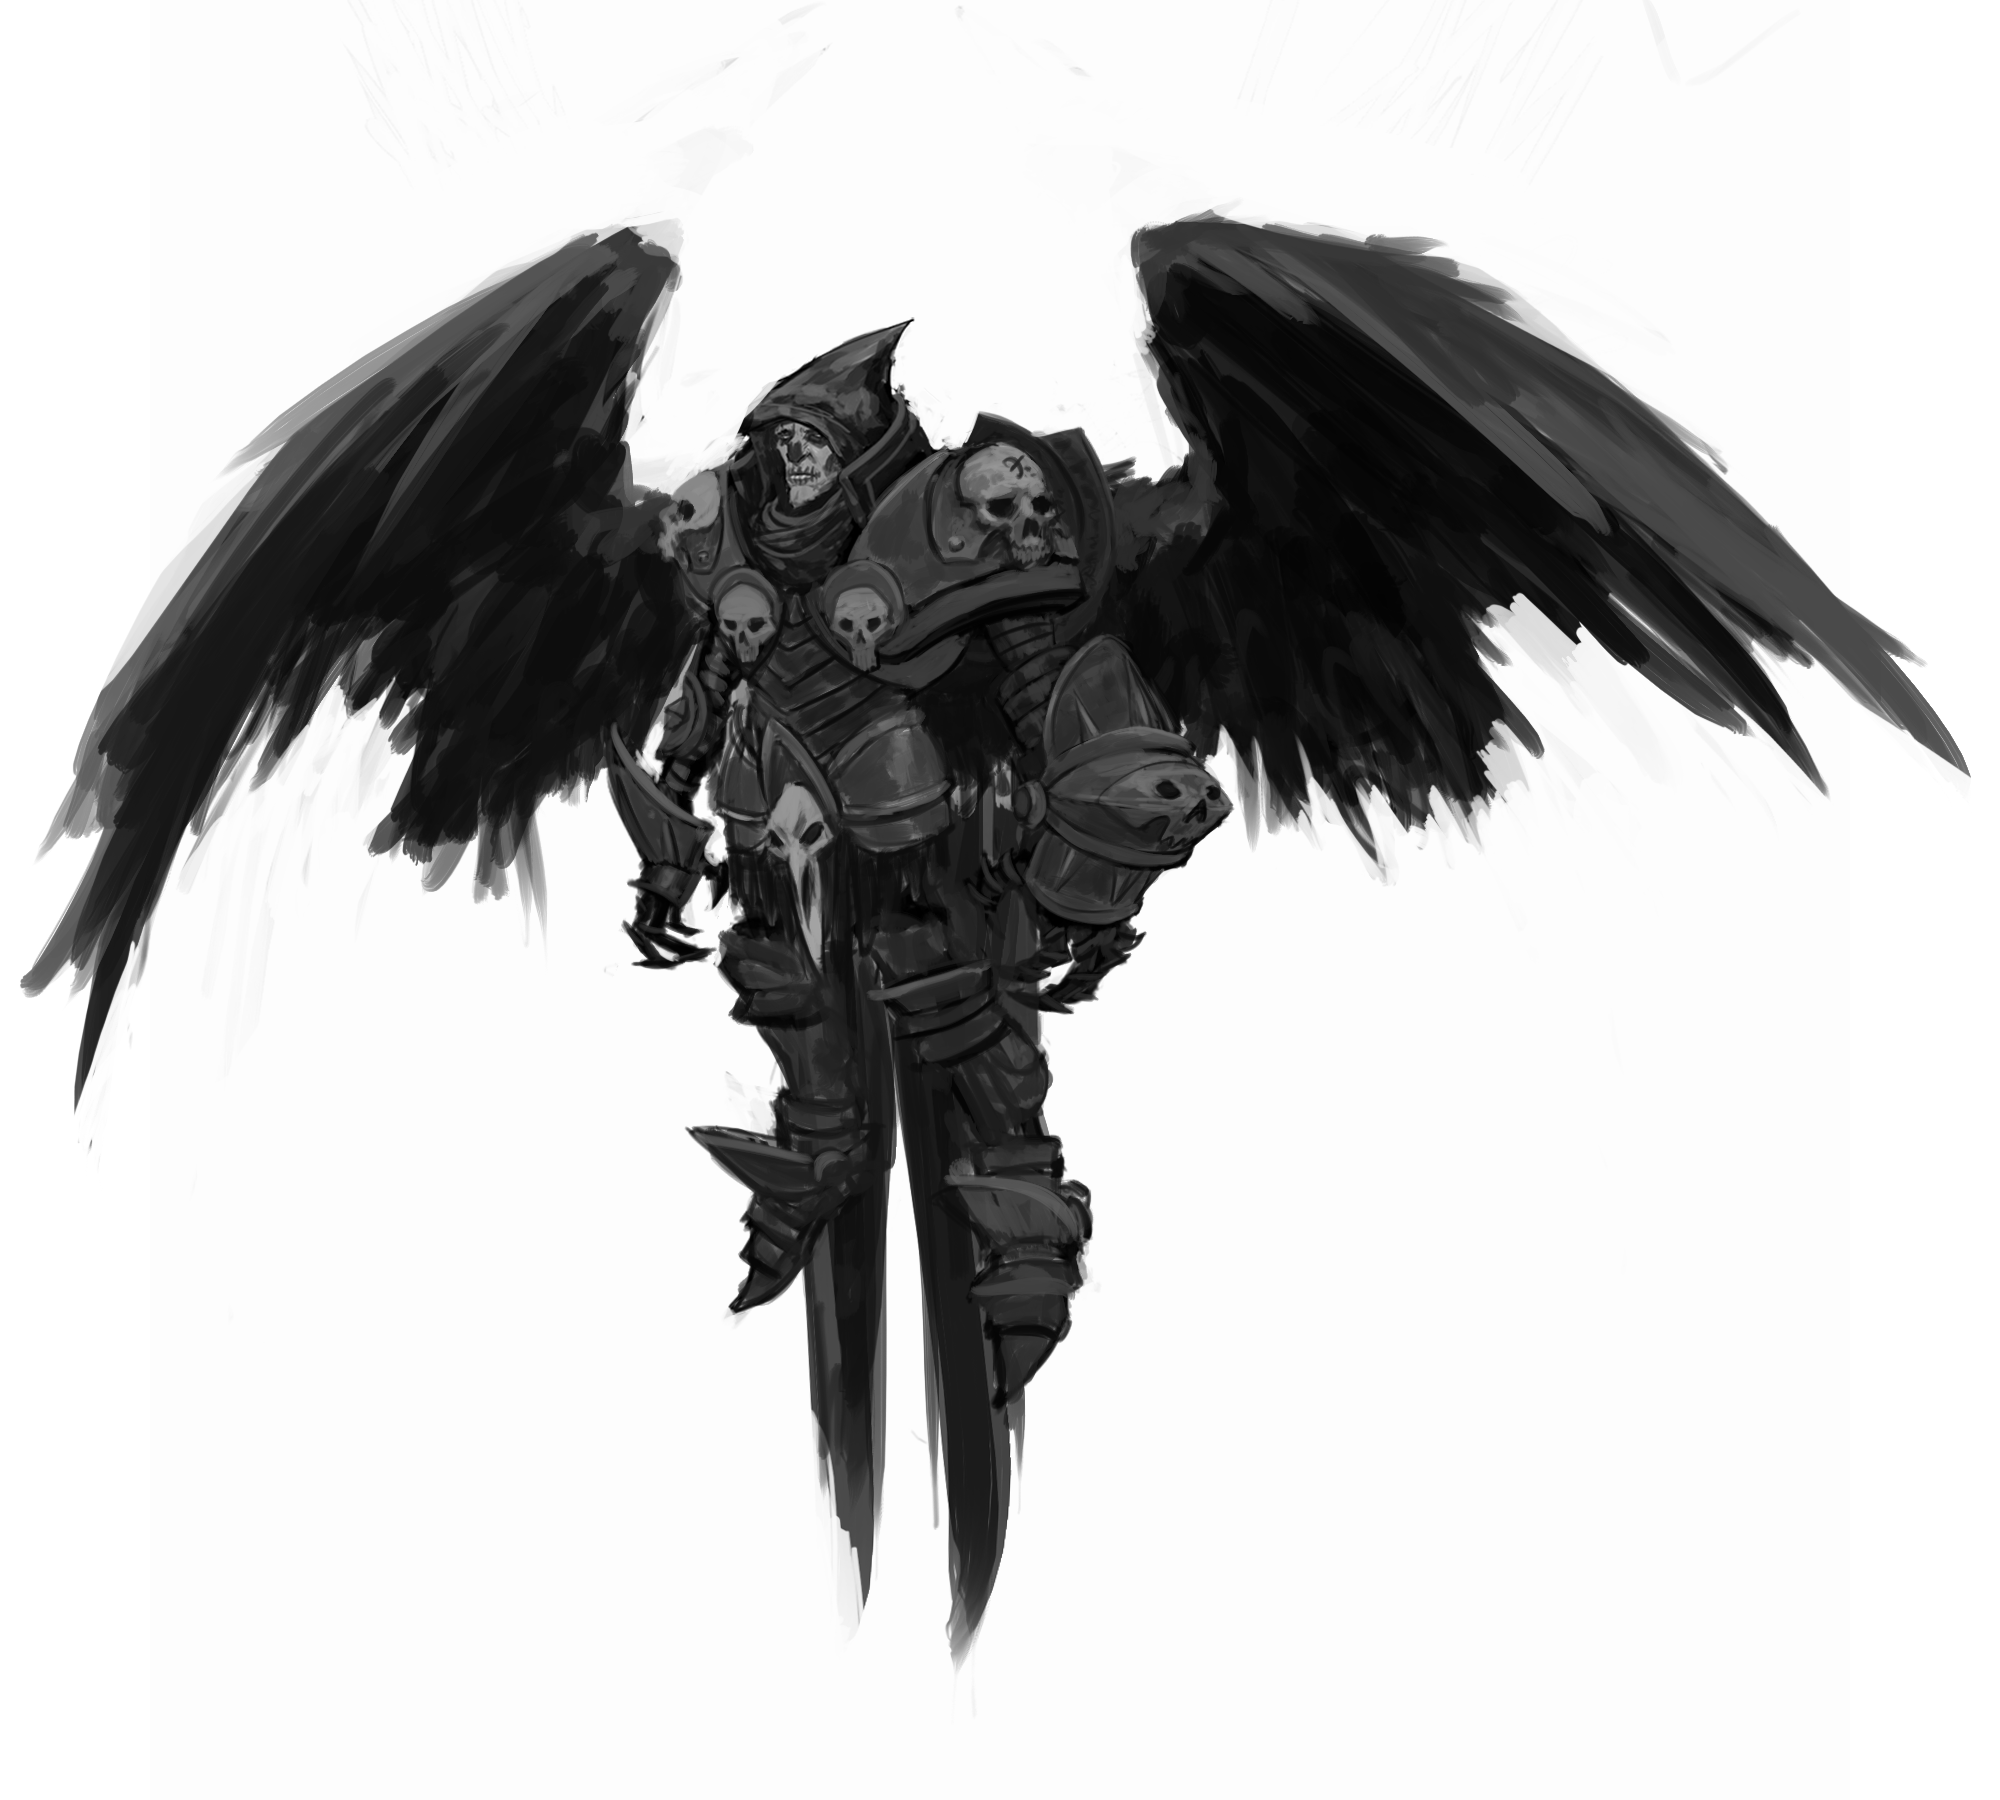 Dark Angel by KZBulat on Clipart library